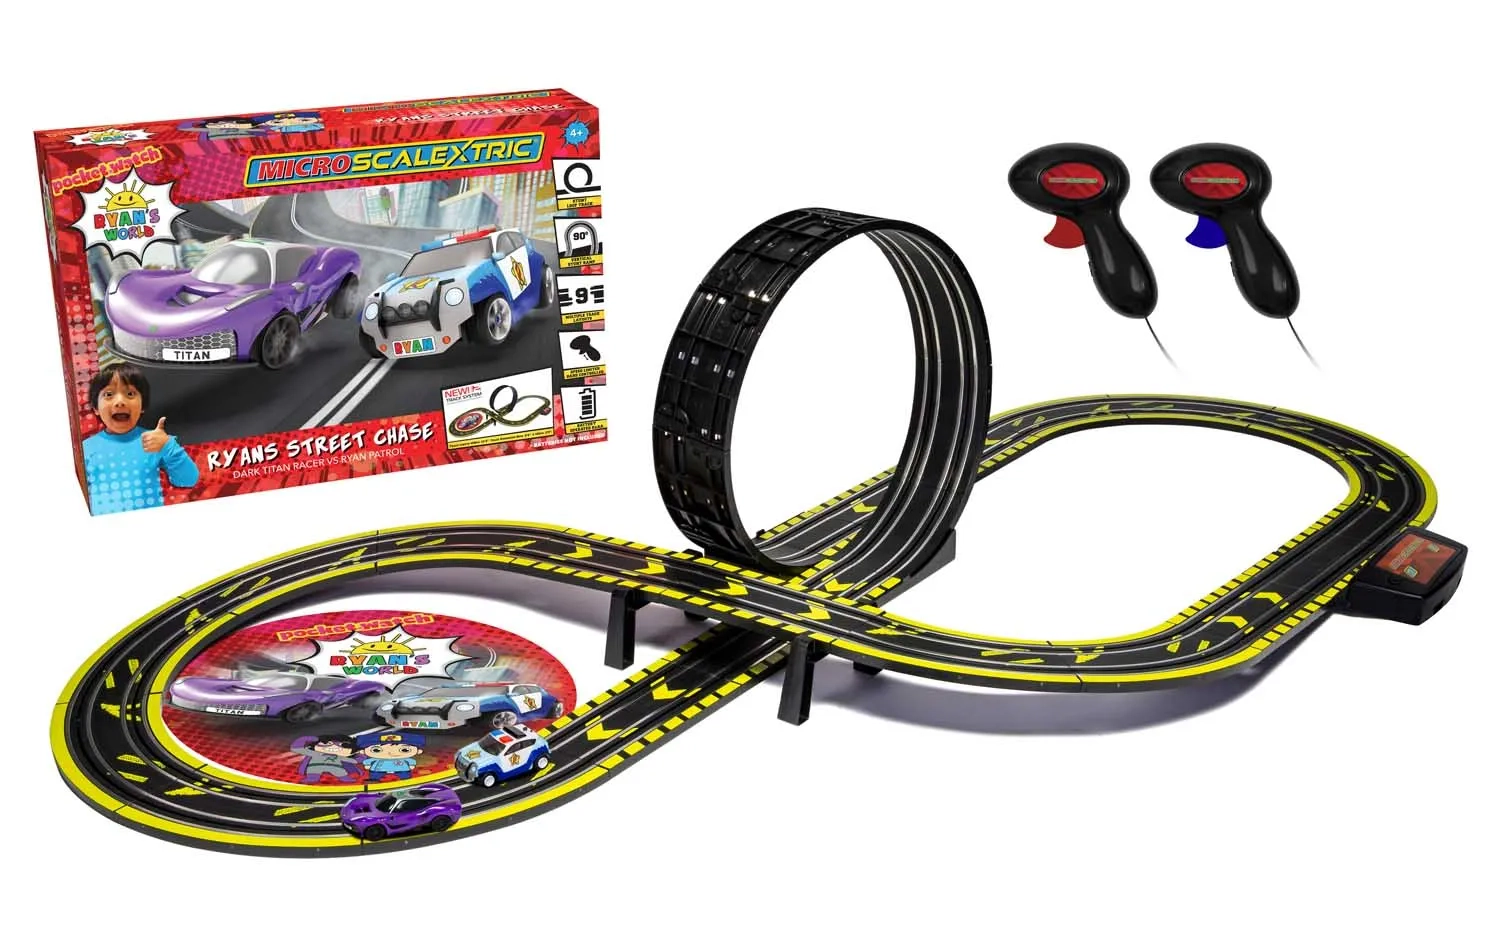 Micro Scalextric Ryan's World Street Chase Battery Powered Race Set